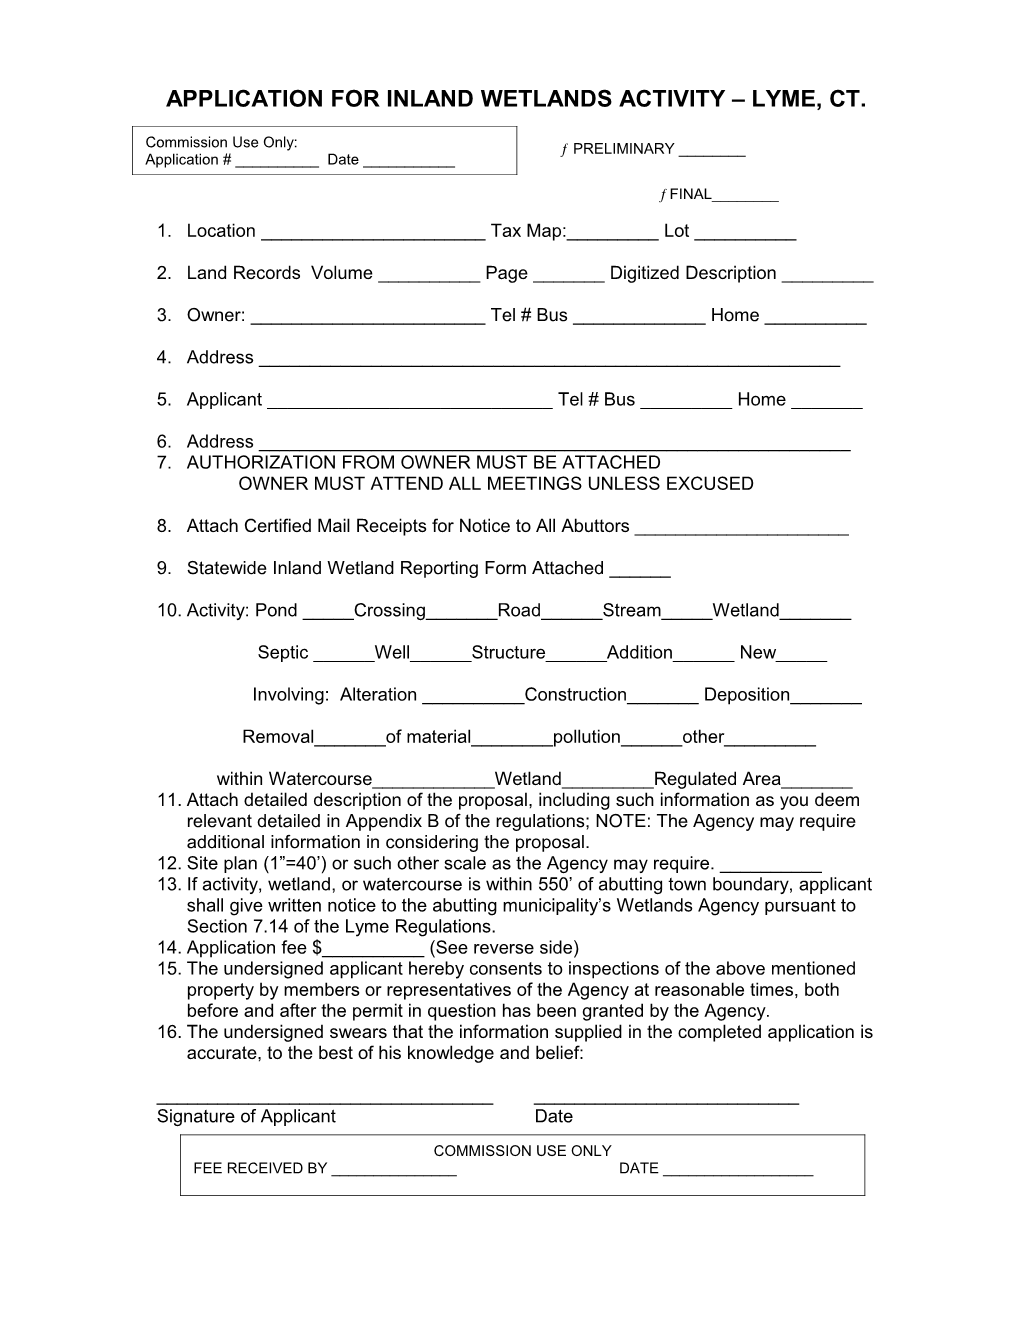 Application for Inland Wetlands Activity Lyme, Ct